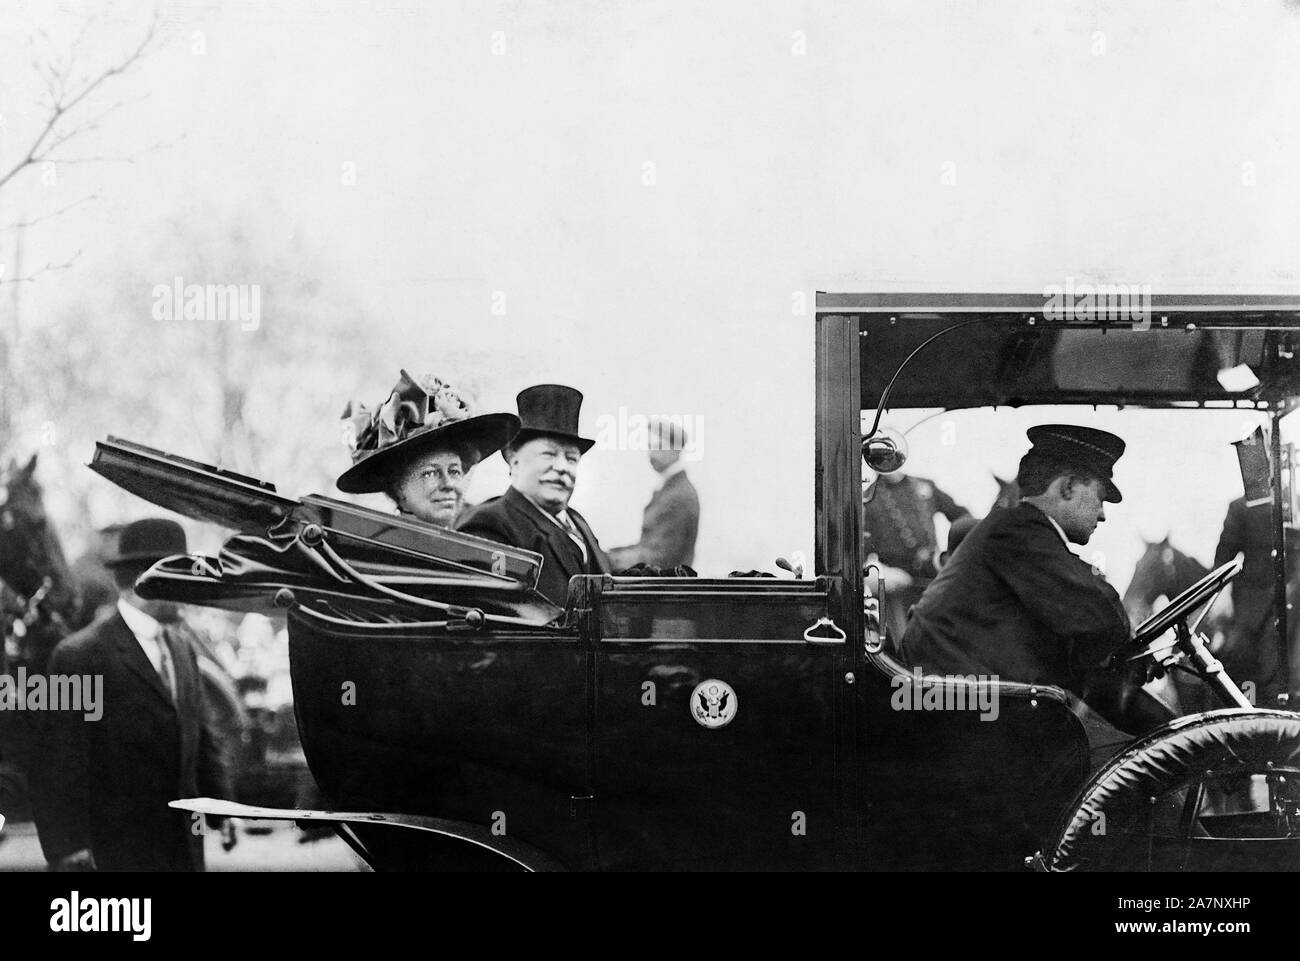 U.S. President William Howard Taft and his wife, First Lady Helen Herron Taft, Seated in back of White House Convertible Automobile with Roof Down, Washington, D.C., USA, Photograph by Barnett McFee Clinedinst, 1909 Stock Photo